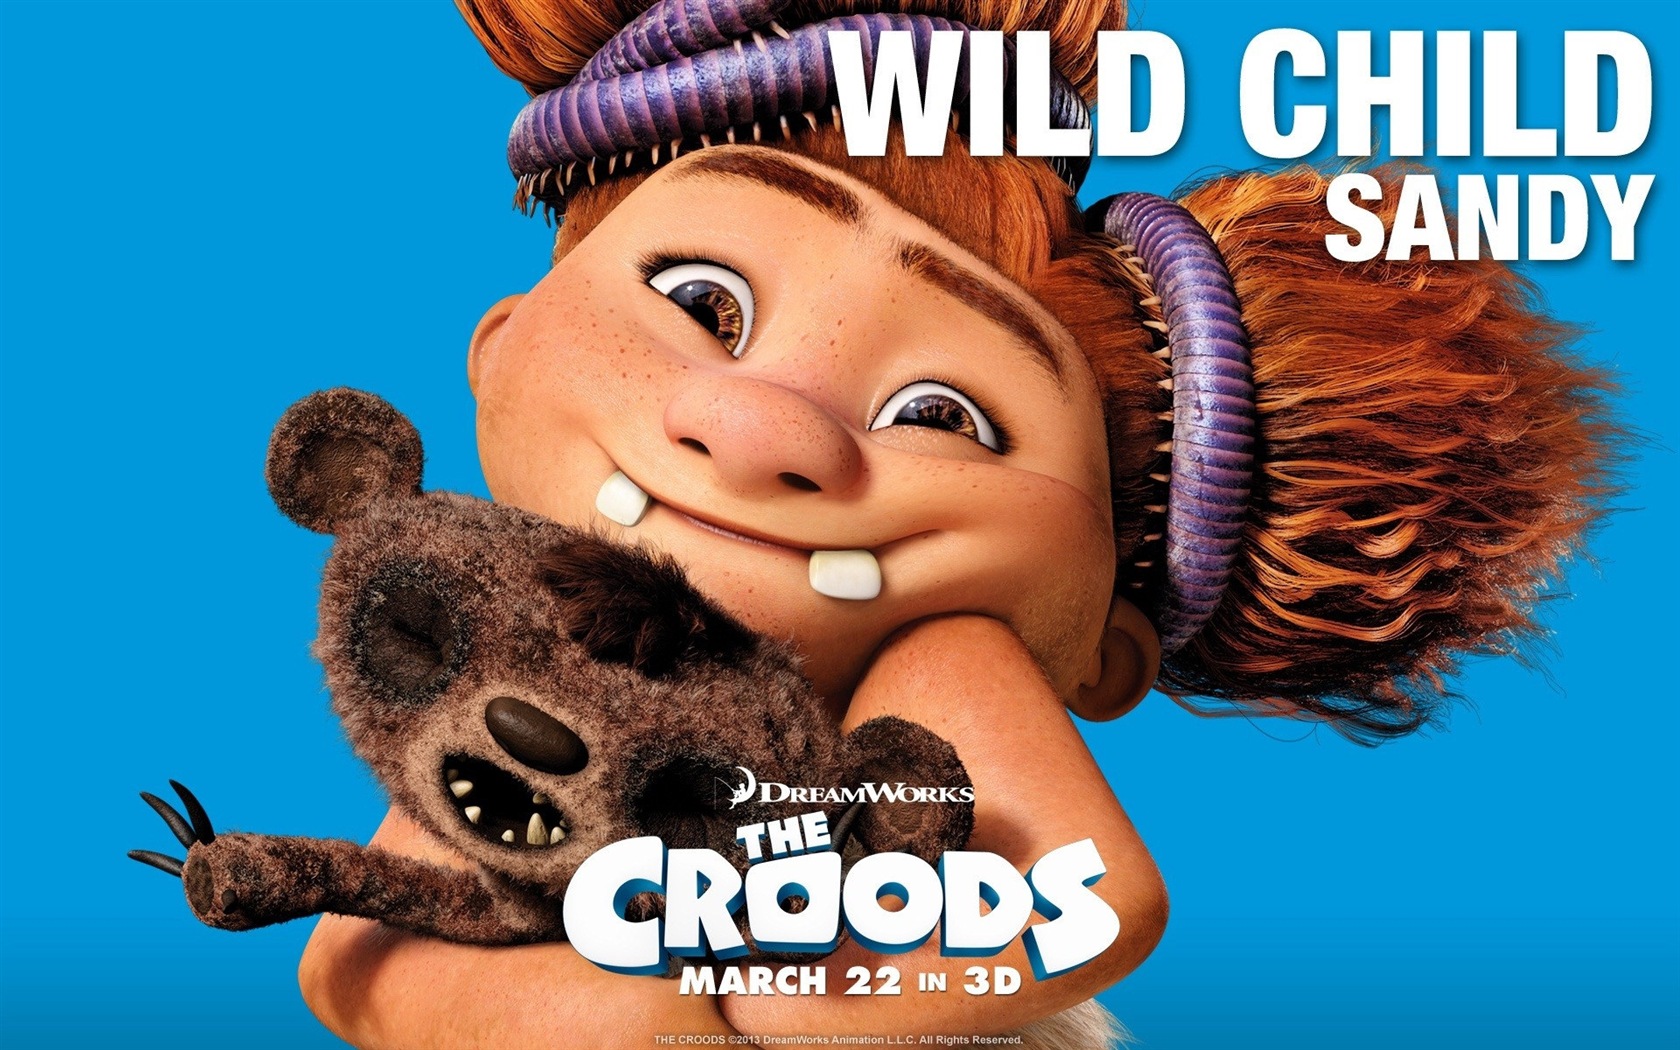 V Croods HD Movie Wallpapers #9 - 1680x1050